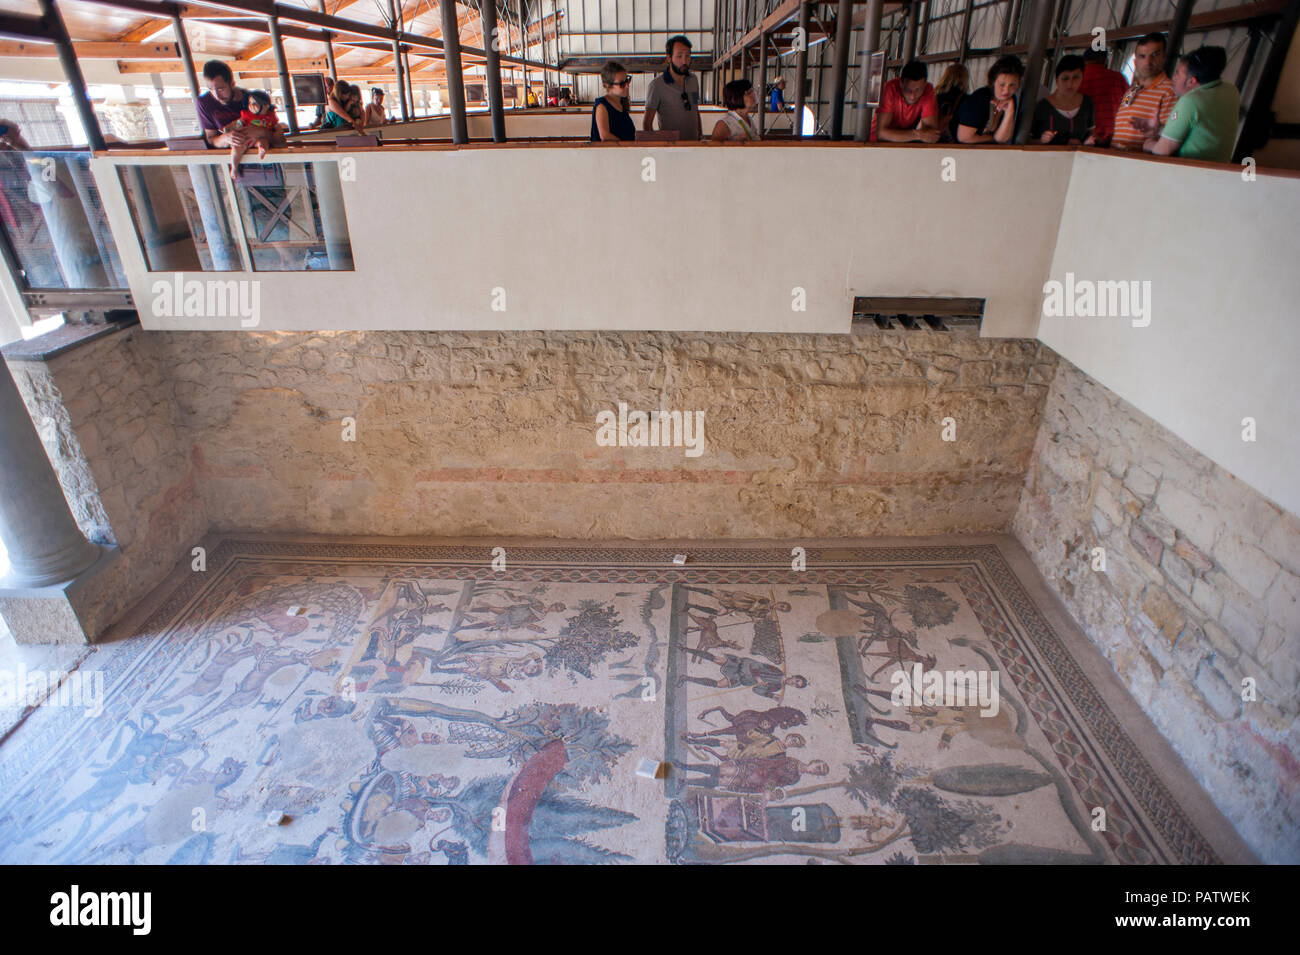 Tourists looking at the 4th century tile mosaics at Villa Romana del Casale, an ancient Roman villa located outside of Piazza Armerina in central Sici Stock Photo